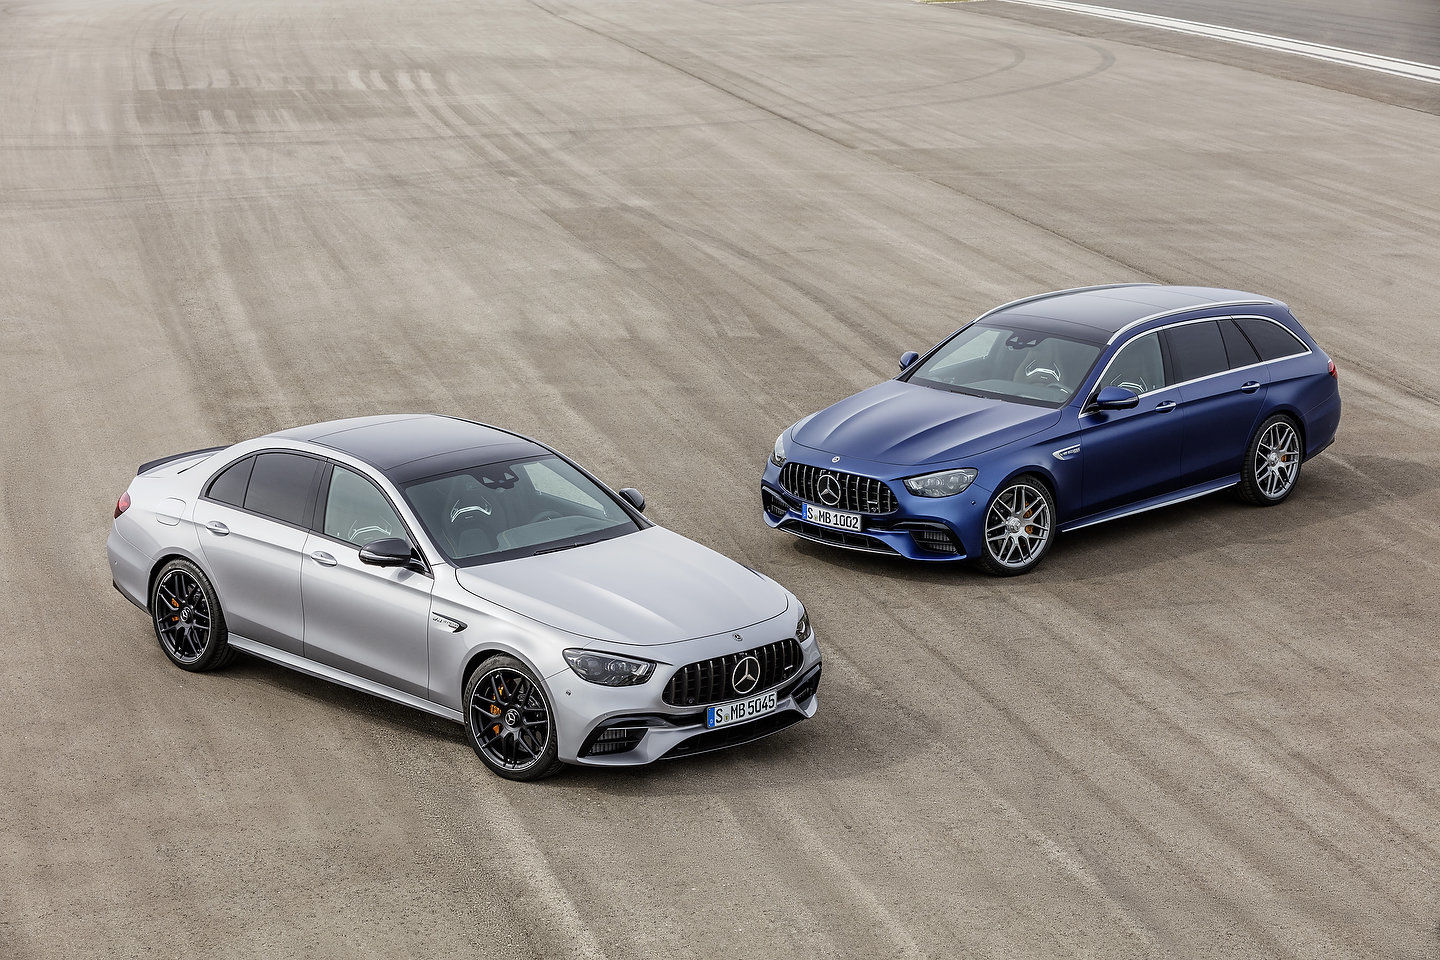 The new Mercedes-AMG E 63 S 4Matic+ refreshed for 2021